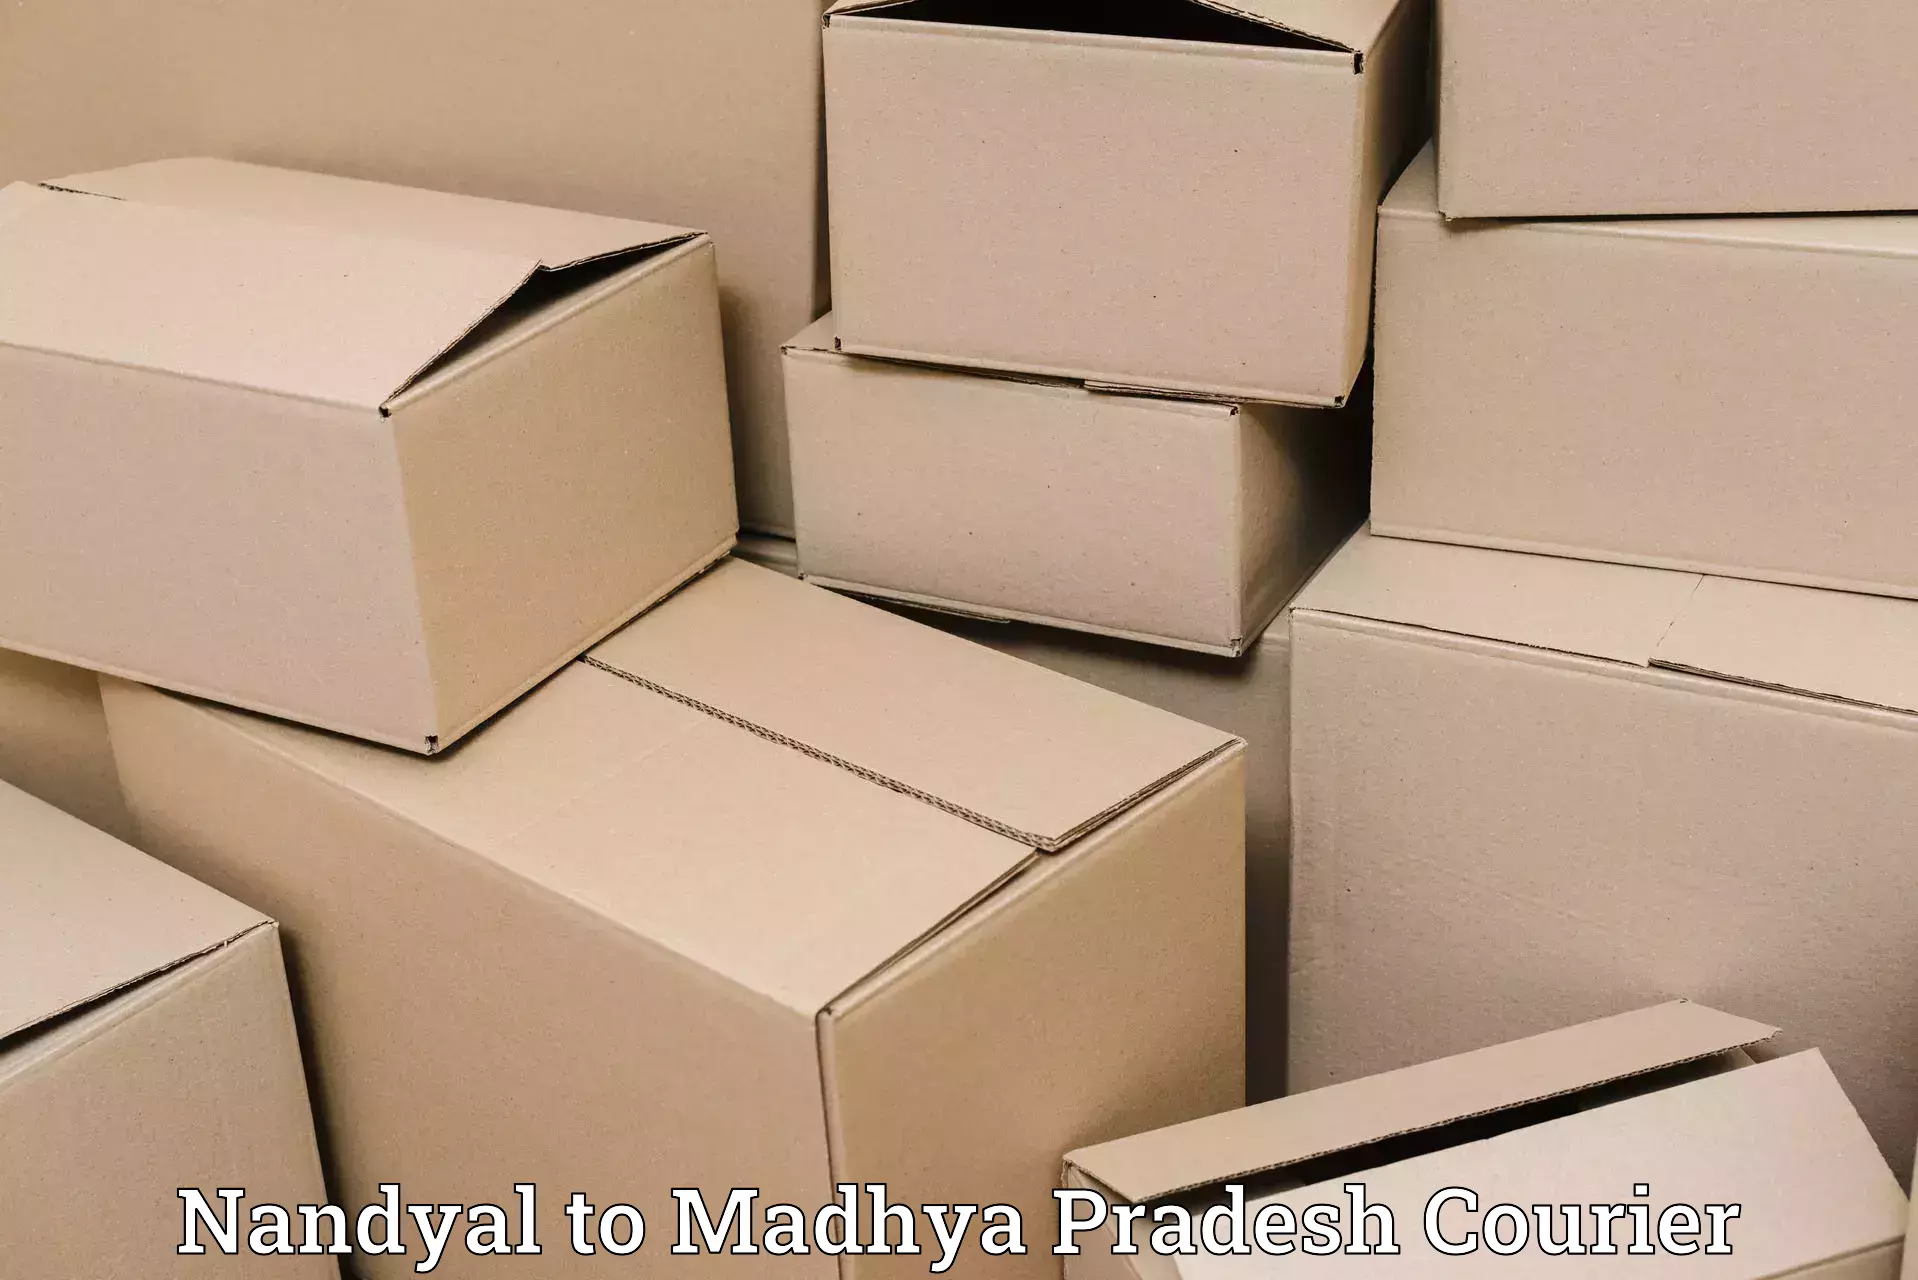 Personal courier services Nandyal to Bhopal